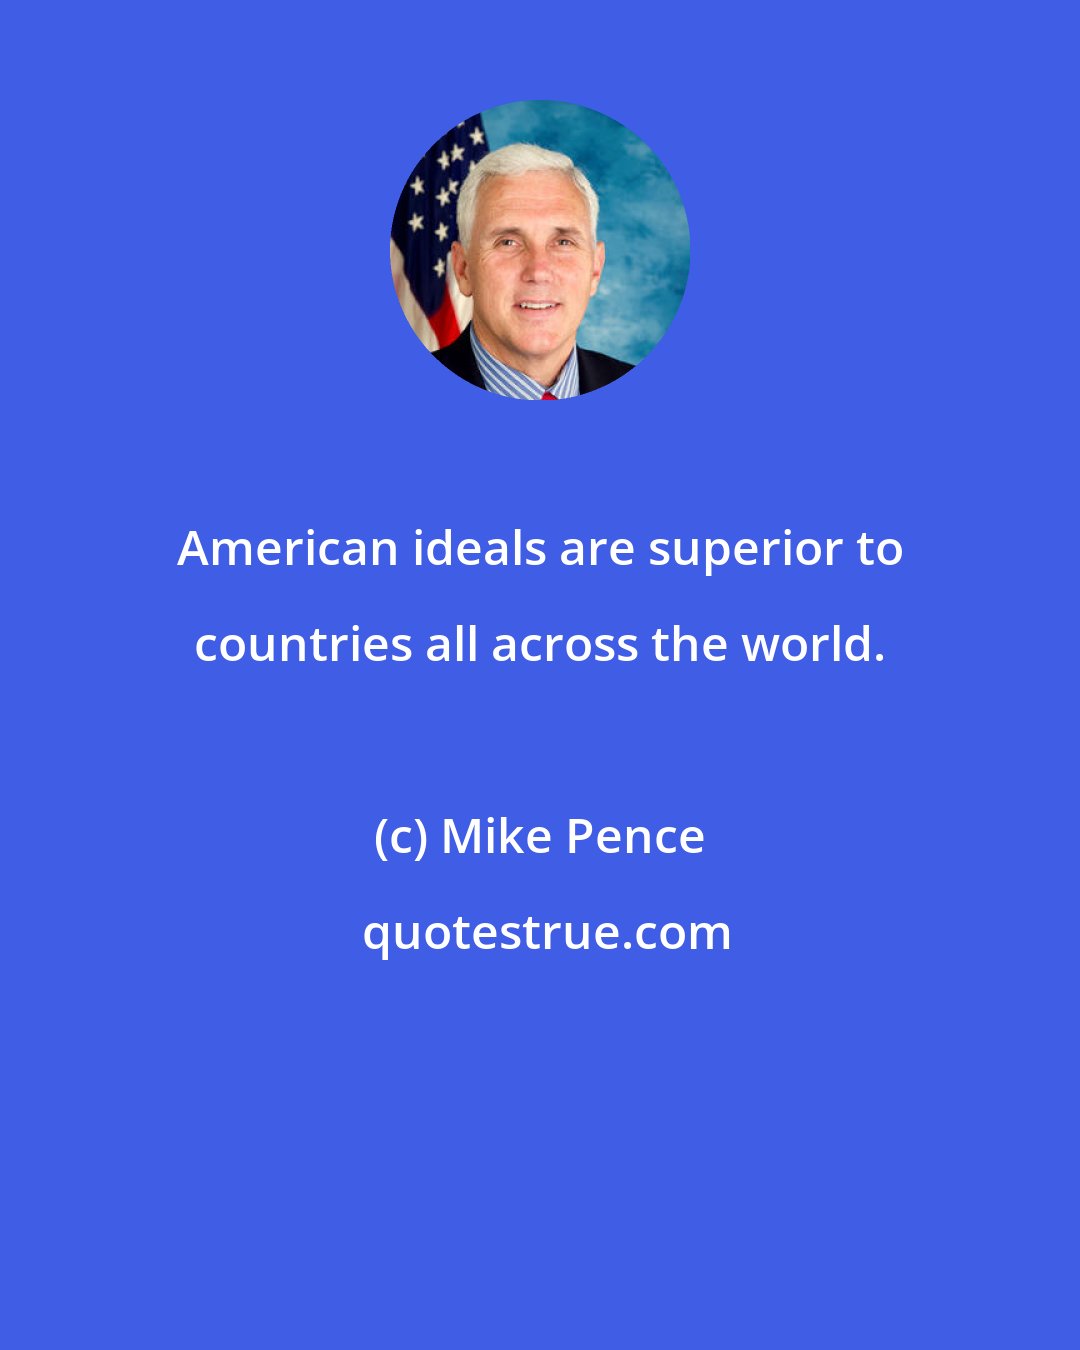 Mike Pence: American ideals are superior to countries all across the world.